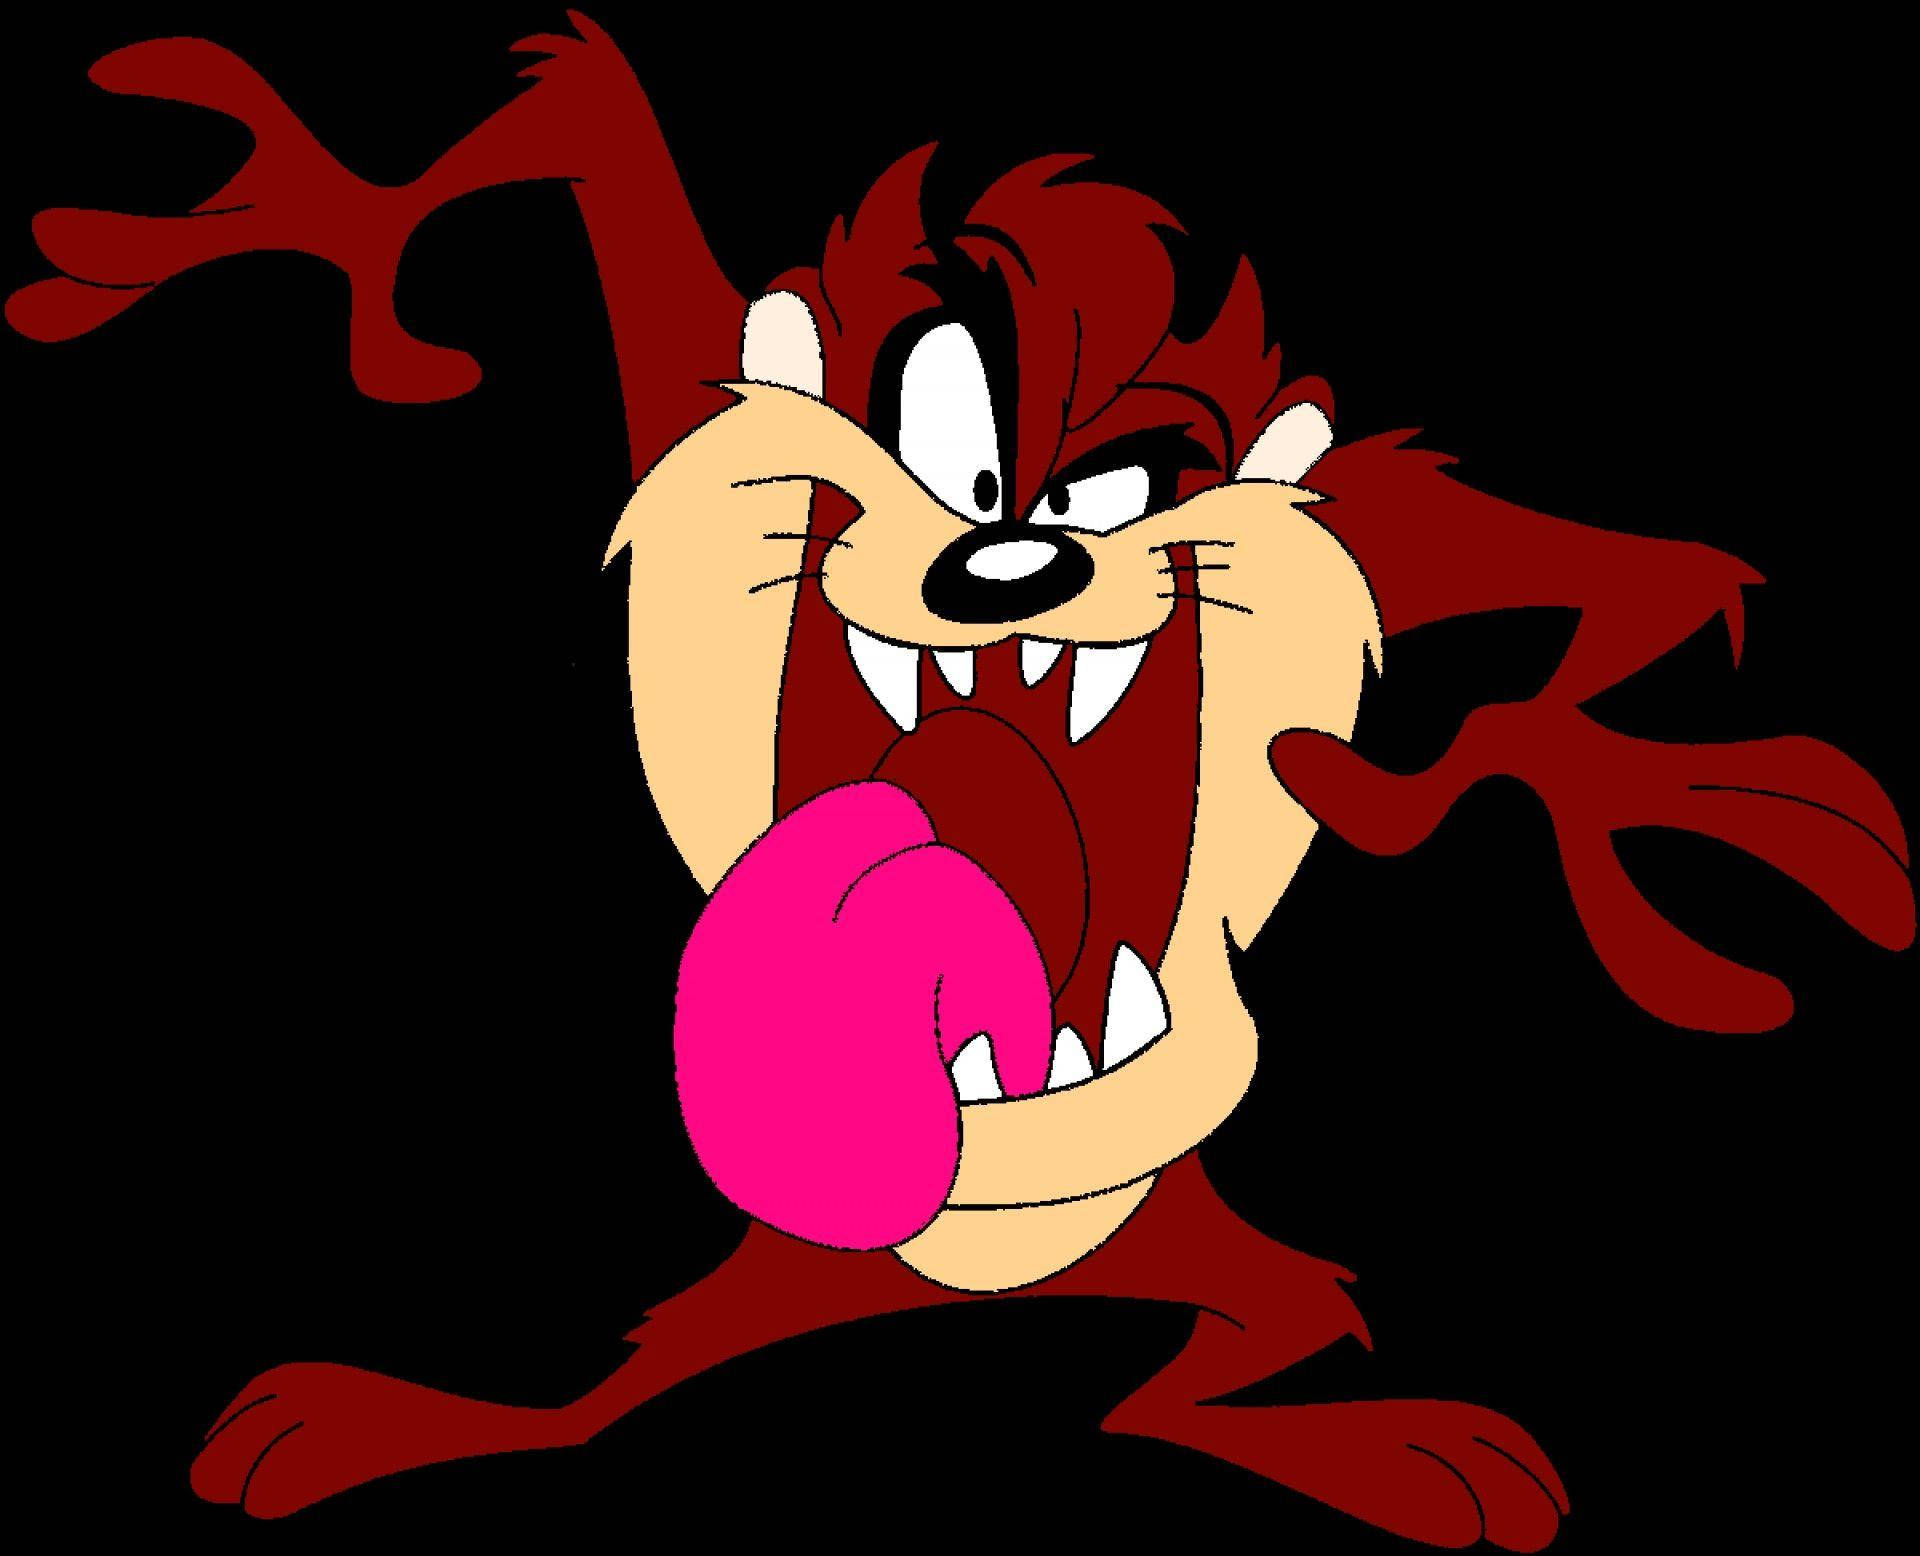 A Cartoon Character With His Tongue Out Background